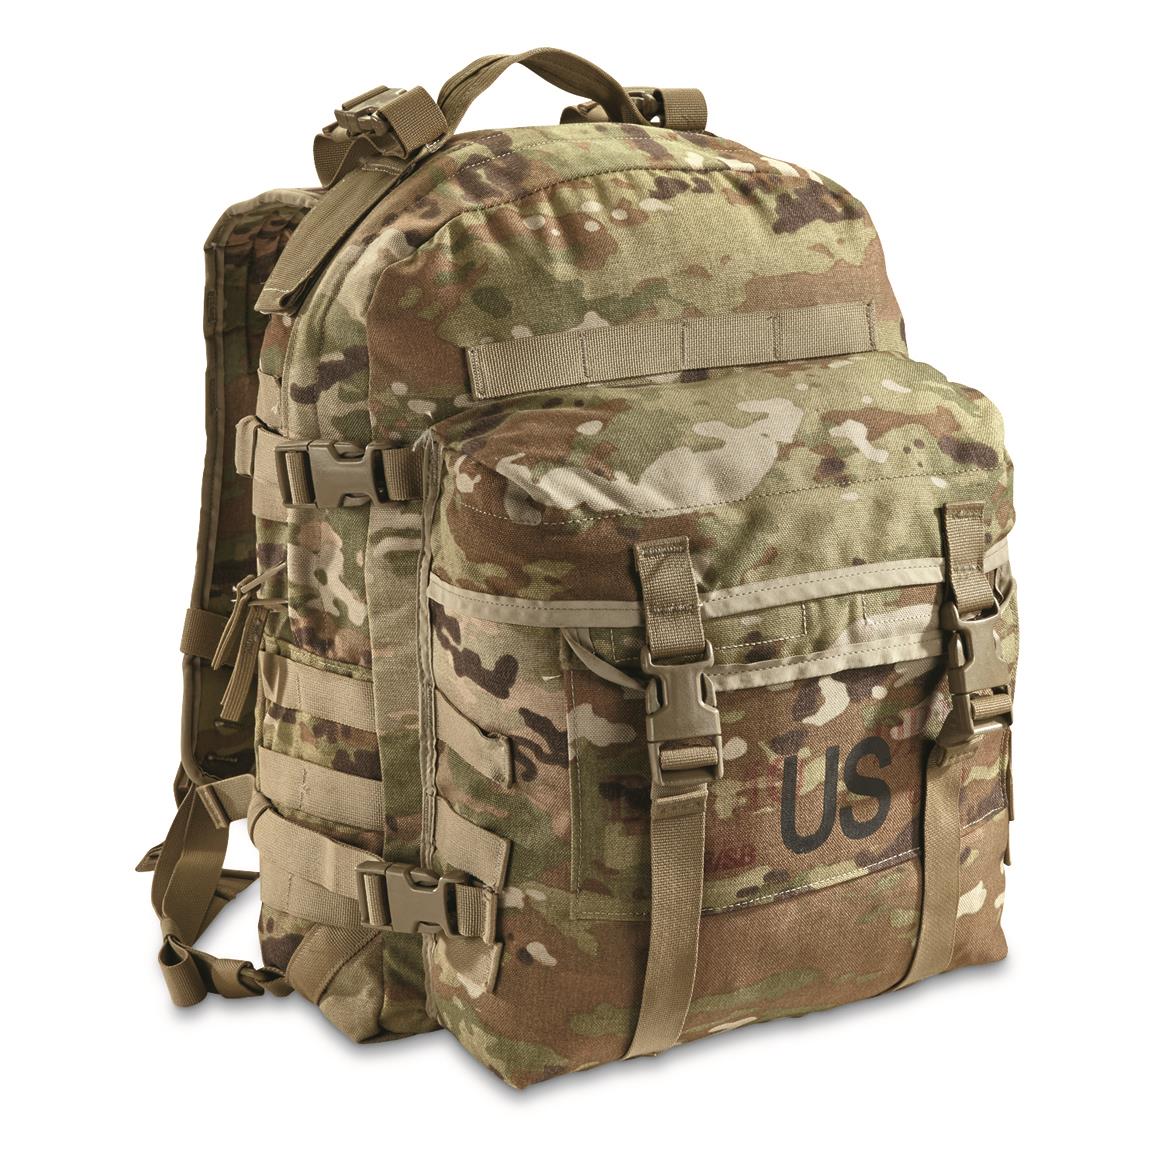 Molle II US Army military Load-Carrying  Assault Pack W/Stiffener backpack bag